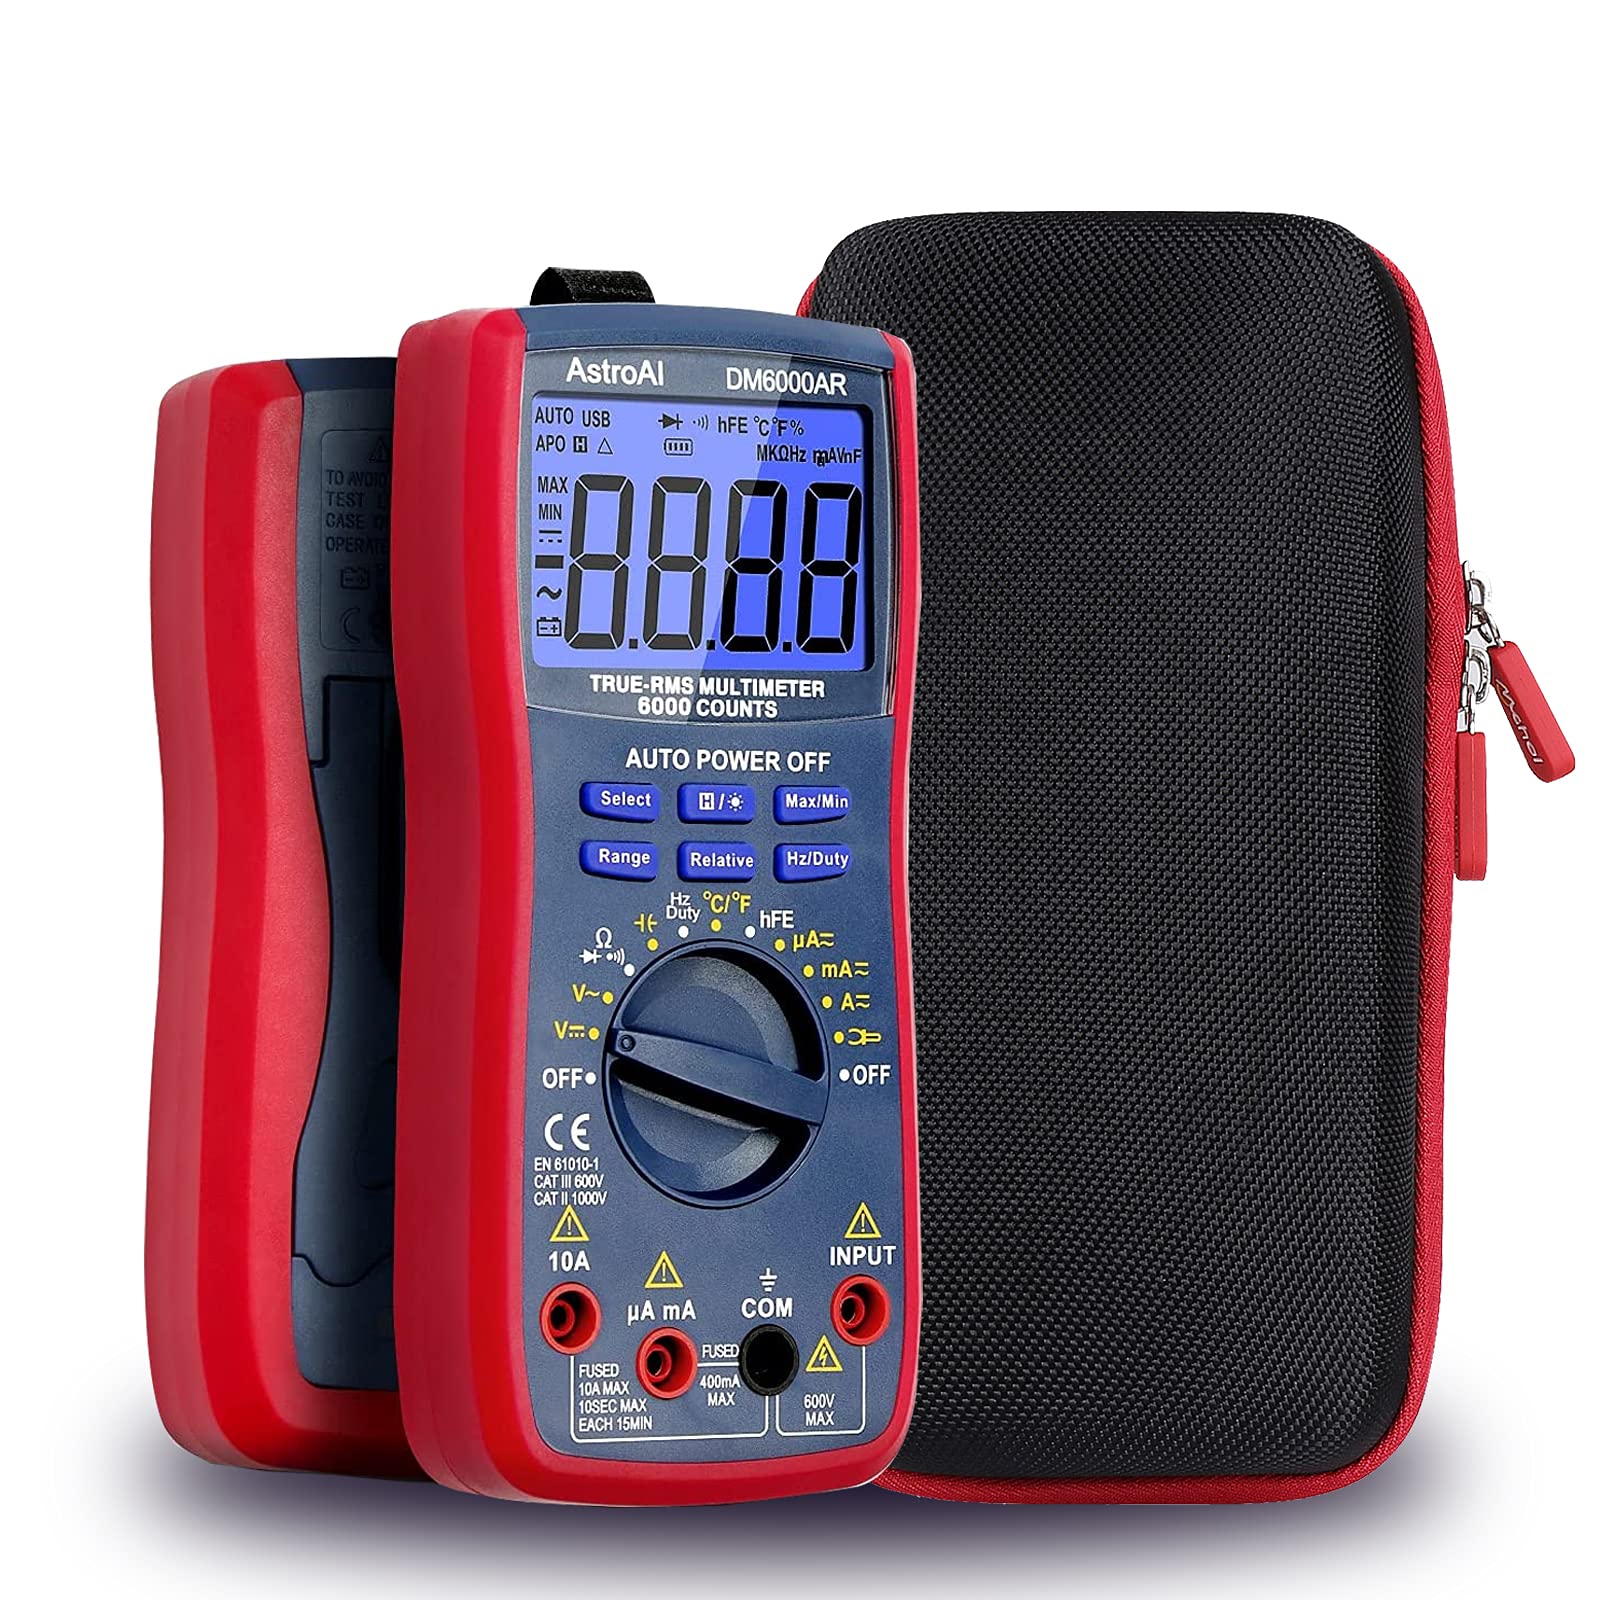 Mchoi Hard Portable Case Compatible with AstroAI Digital Multimeter TRMS 6000 Counts Volt Meter,CASE ONLY